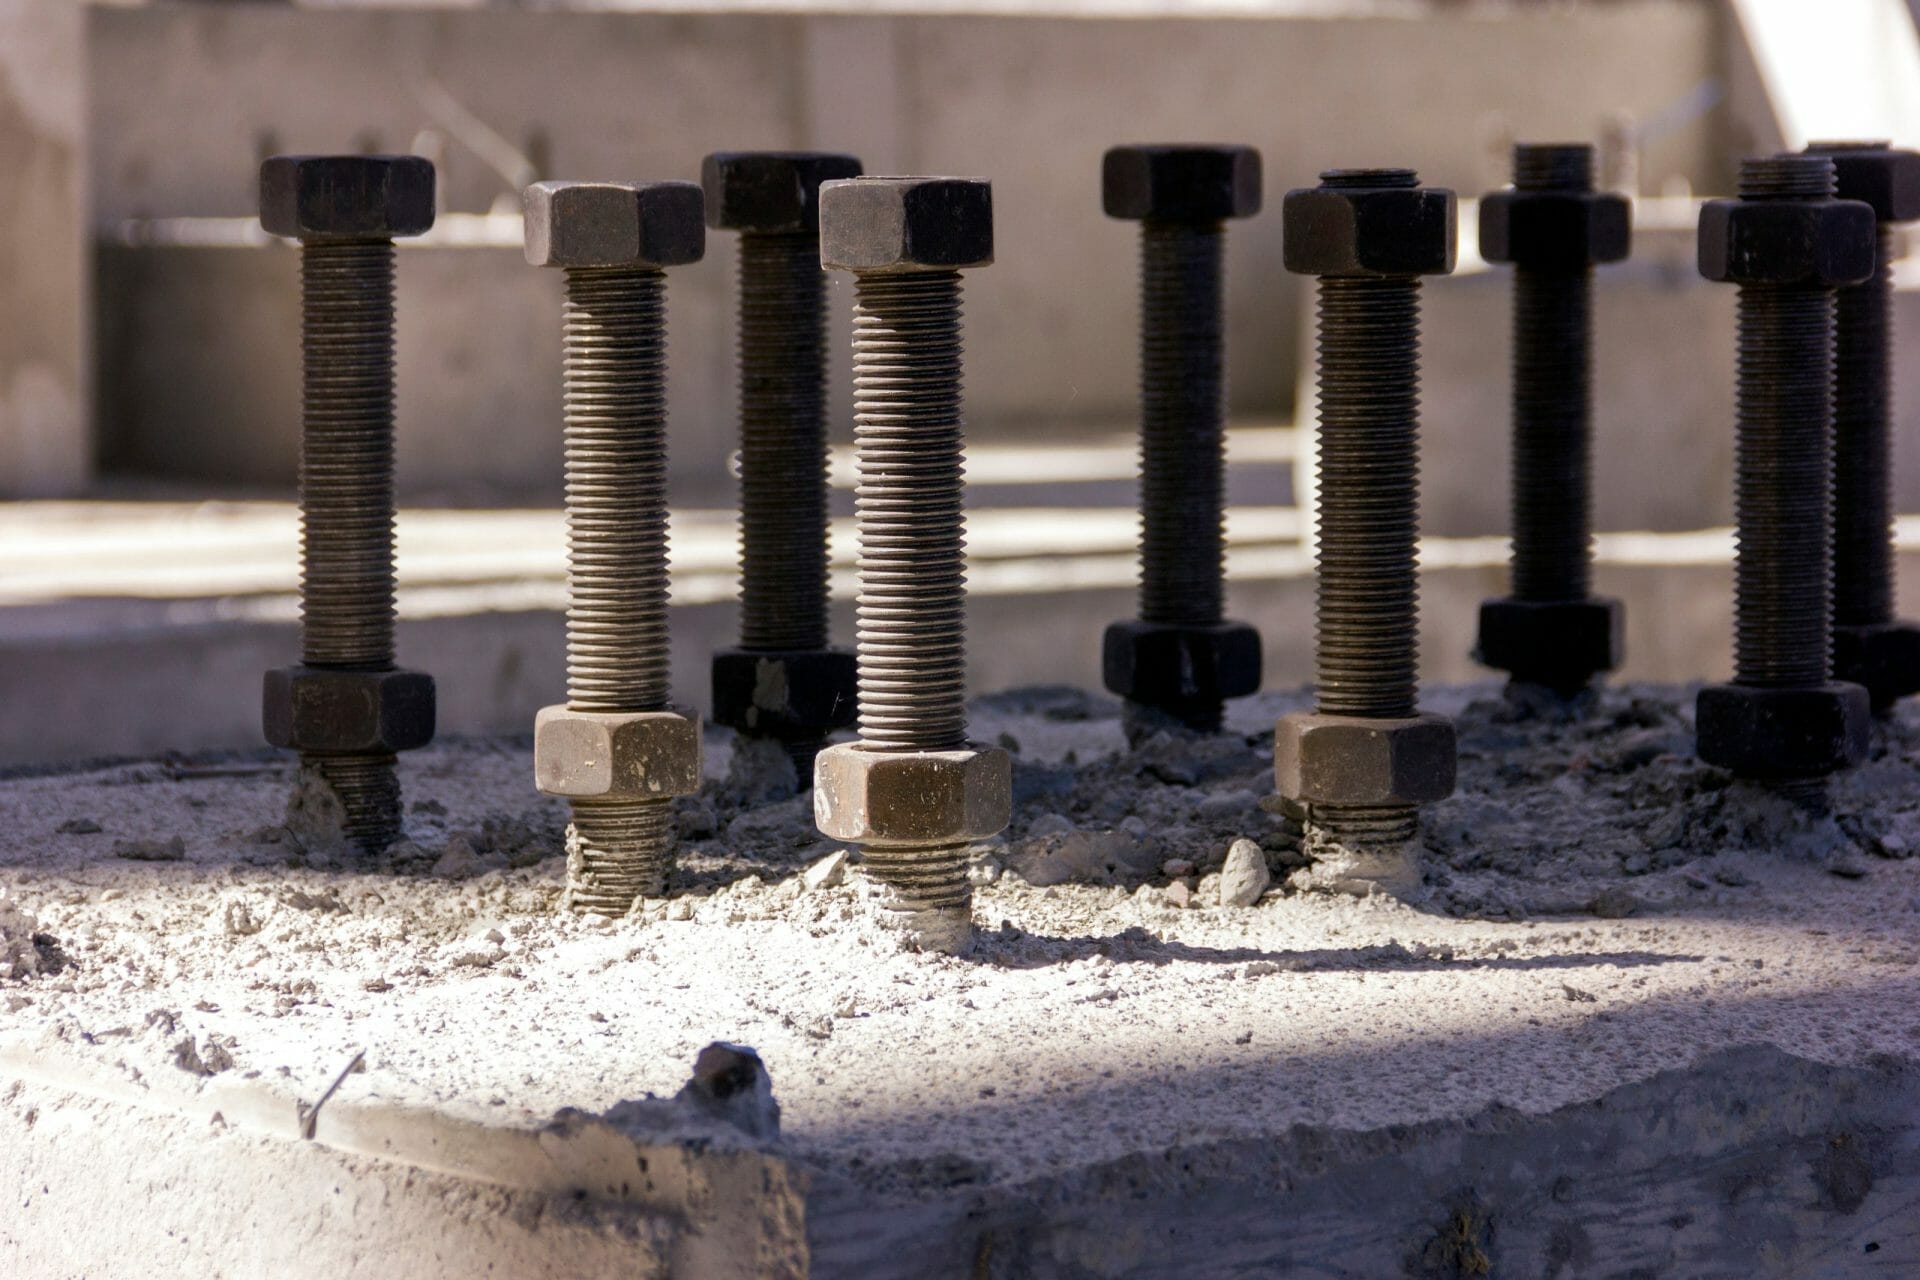 Foundation Bolt Types: Which One Do You Need?